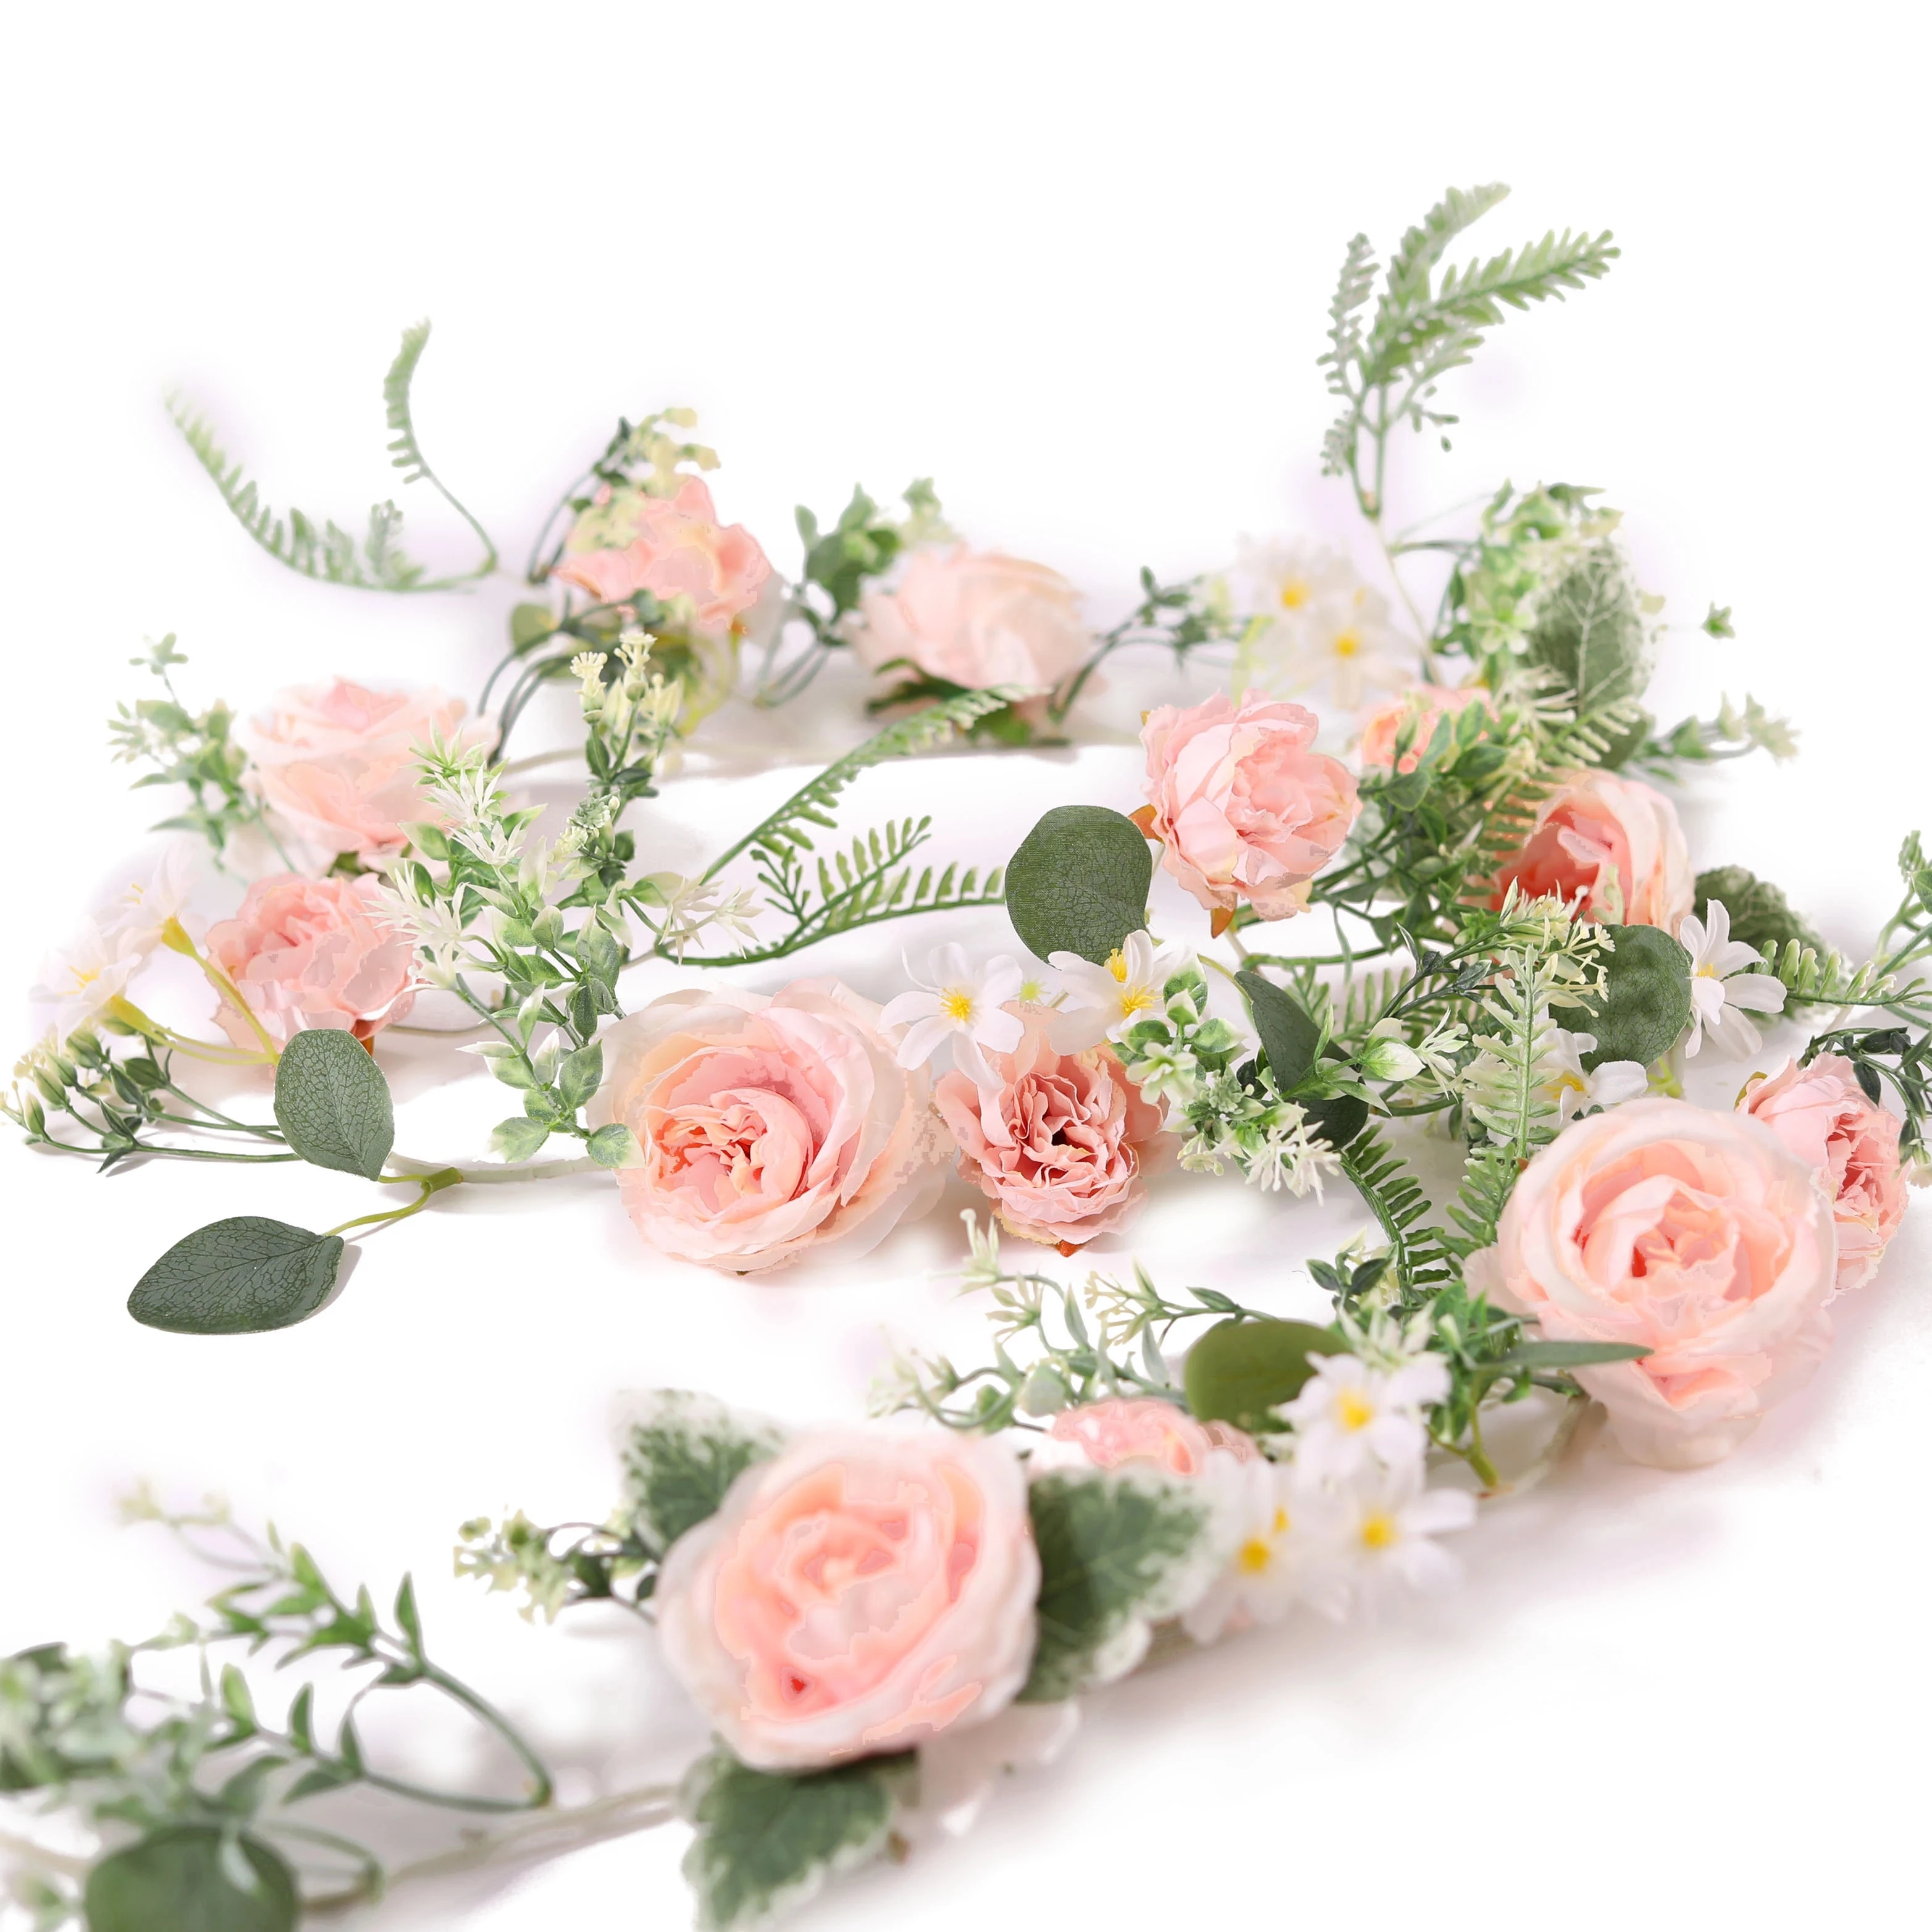 1.75M Artificial Flowers Rose Eucalyptus Garland Silk Peony Vines Fake Ivy Plants for Wedding Party Home Arch Table Room Decor